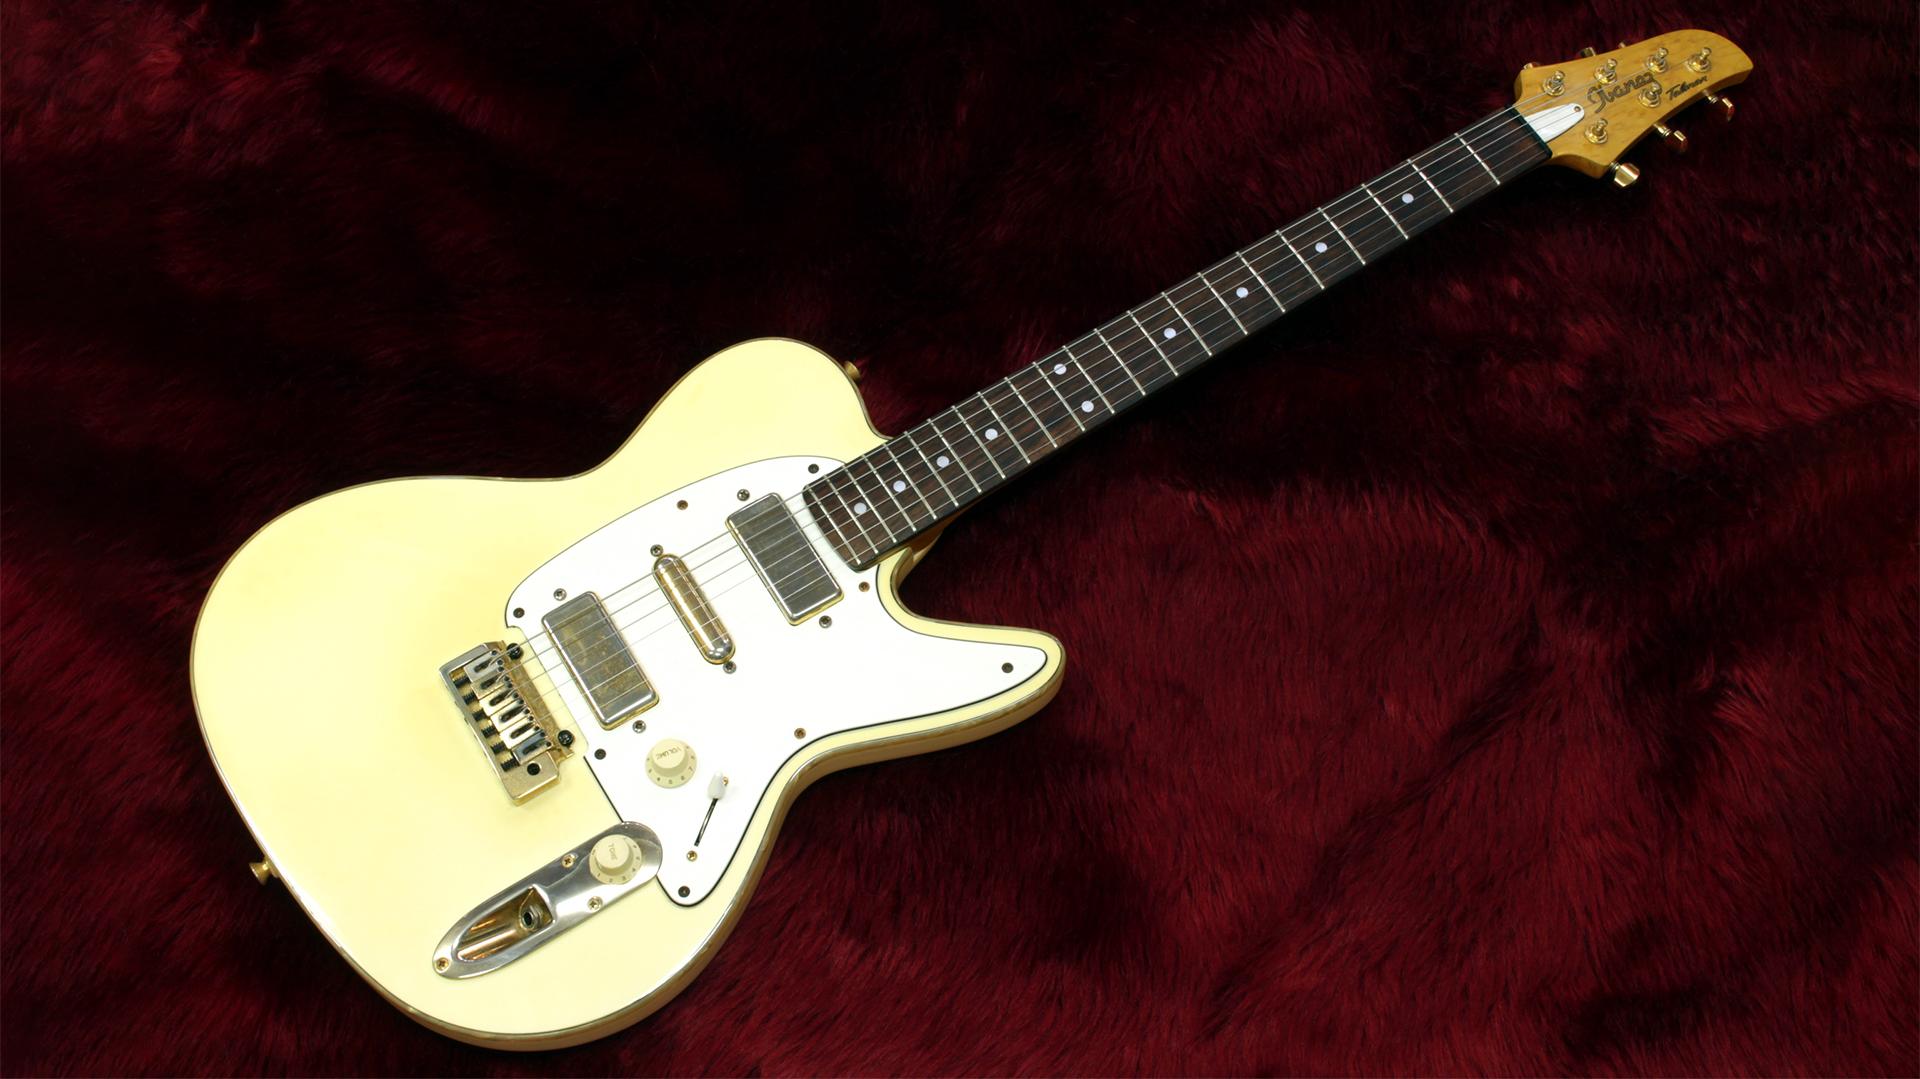 TV650 WH finish guitar showing heavy yellowing